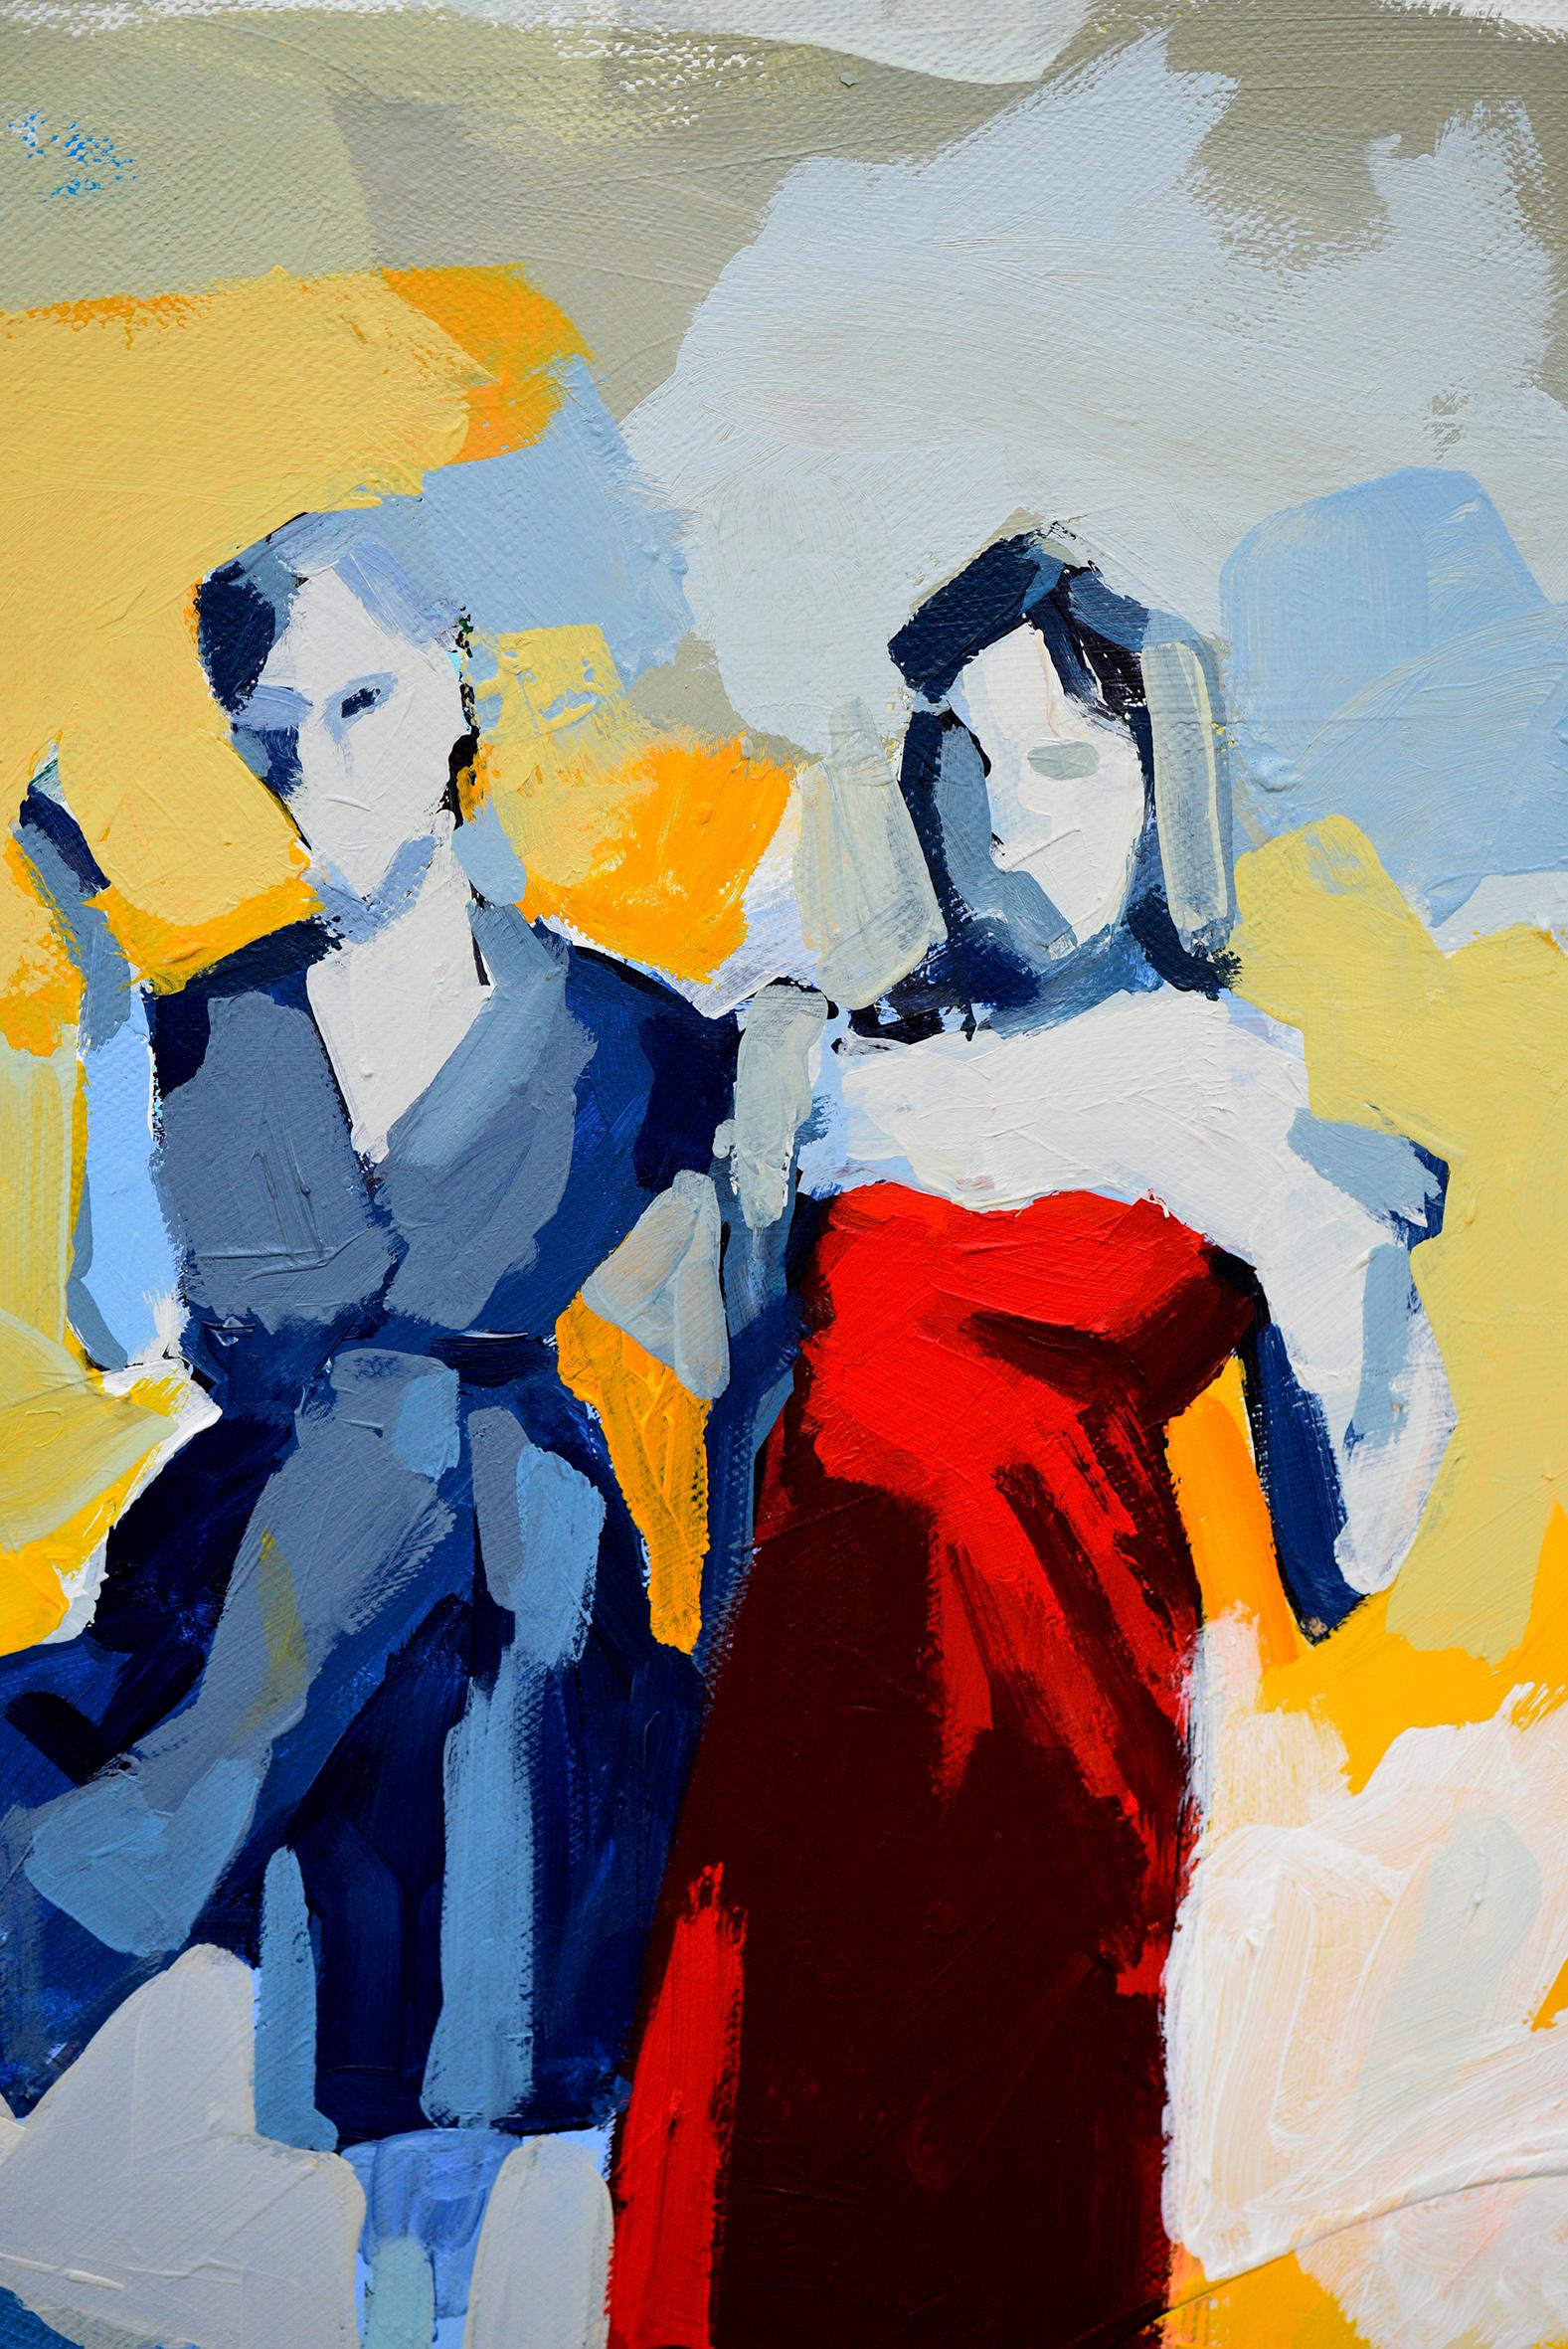 Mad Men
80 x 120 cm
oil on canvas 
2019

A wide, apparently endless plain forms the background of the events: out of nowhere, dark figures enter the scenery, as if coming from the depths of the canvas, appearing through layers of bright, shiny white